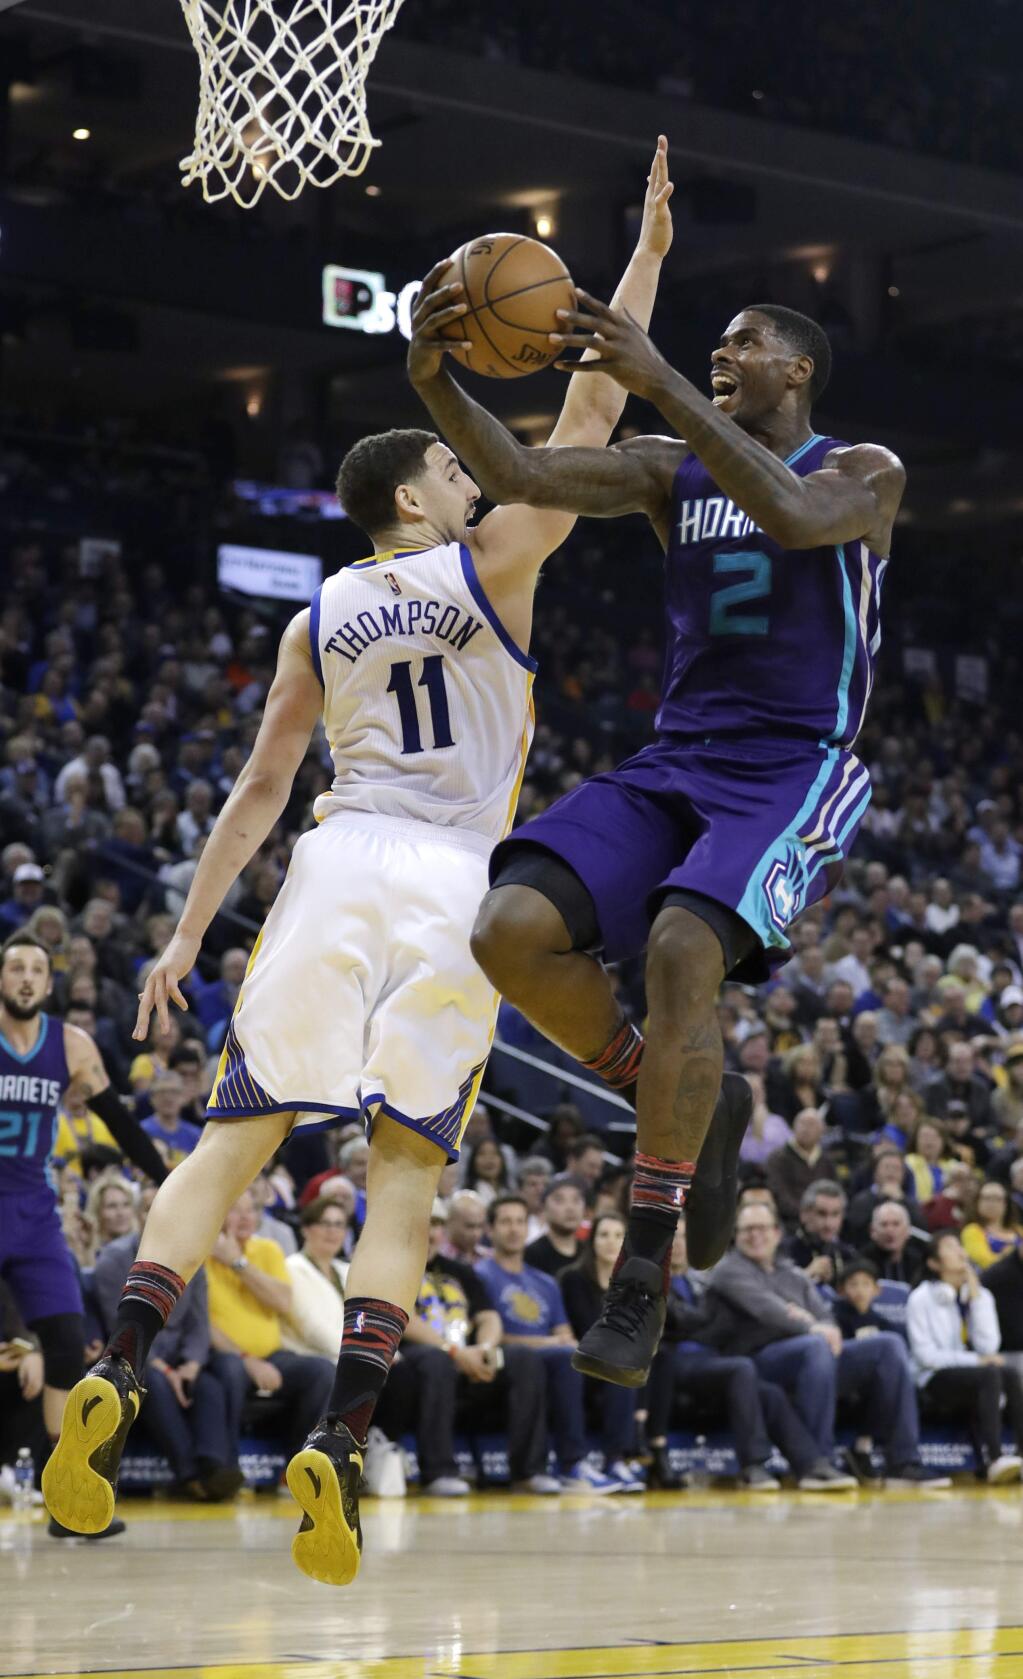 Charlotte Hornets' Marvin Williams (2) drives past Golden State Warriors' Klay Thompson (11) during the first half of an NBA basketball game Wednesday, Feb. 1, 2017, in Oakland, Calif. (AP Photo/Marcio Jose Sanchez)